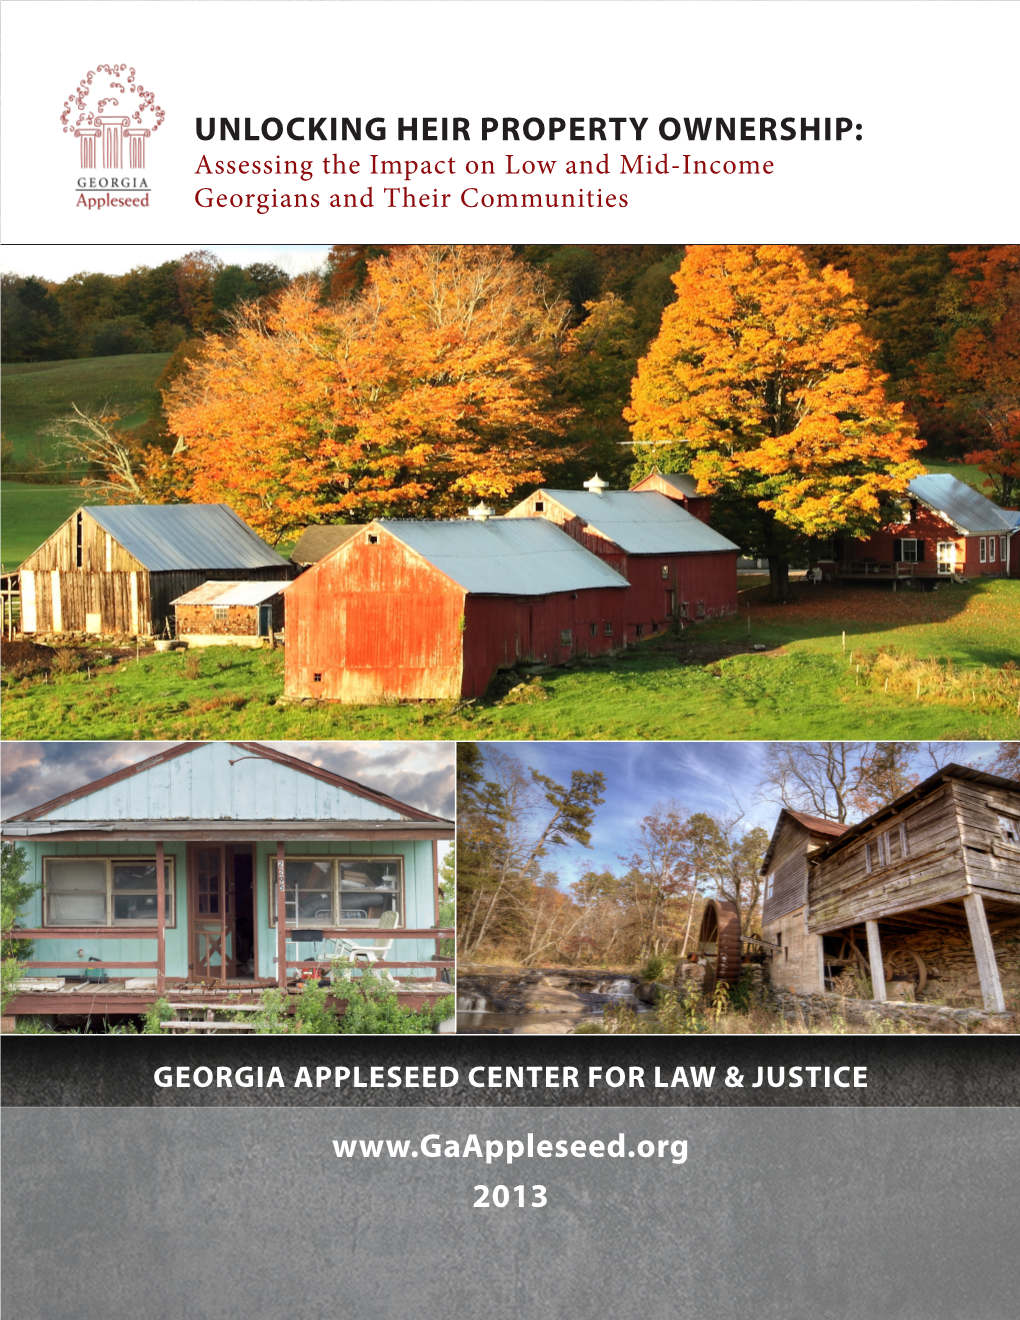 UNLOCKING HEIR PROPERTY OWNERSHIP: Assessing the Impact on Low and Mid-Income Georgians and Their Communities